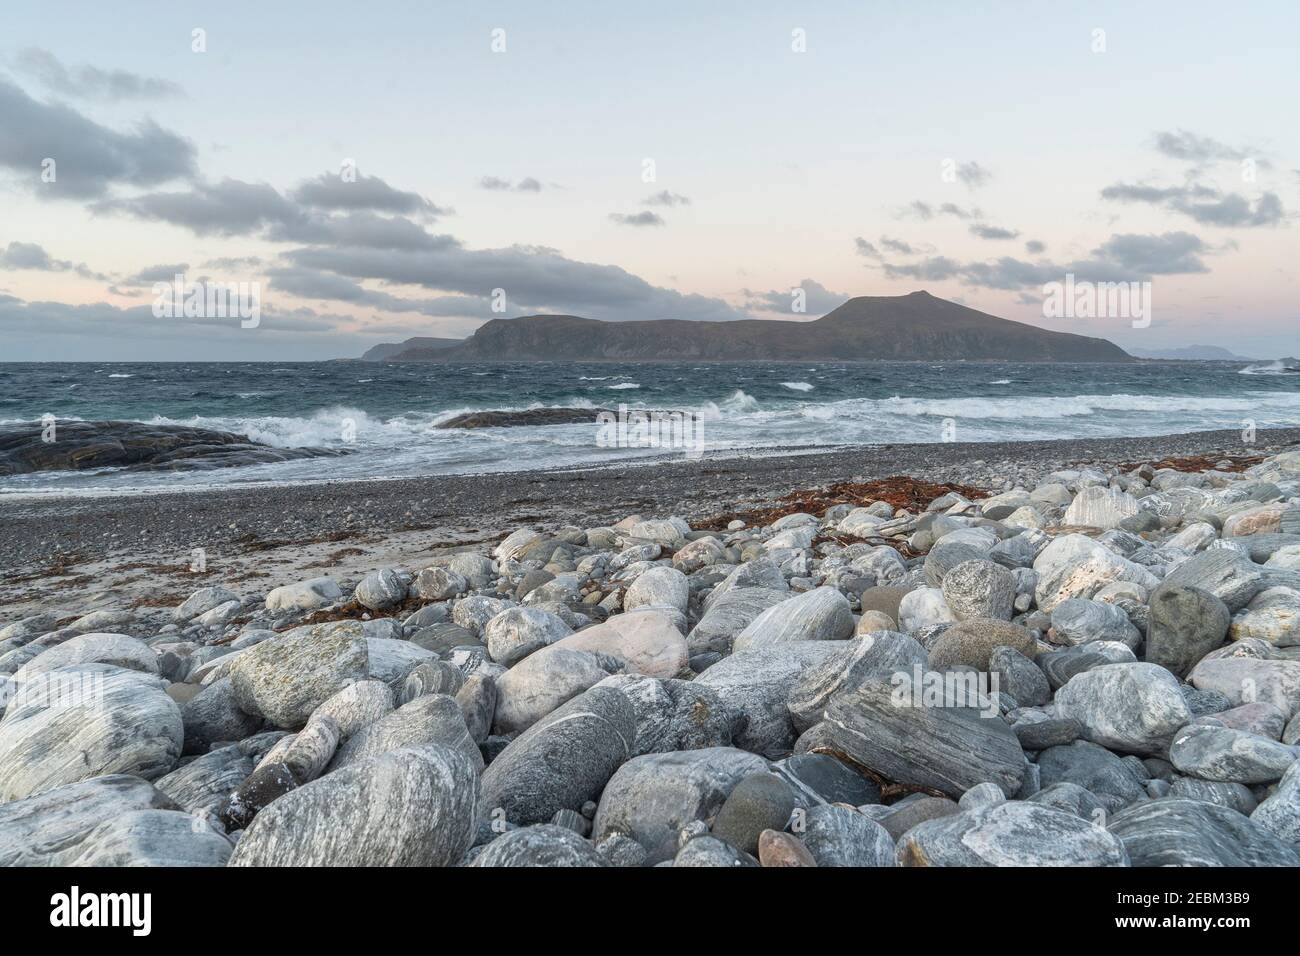 Landscape image from the Norwegian west coast. The island in the background is soon to be populated with wind turbines, changing the landscape. Stock Photo